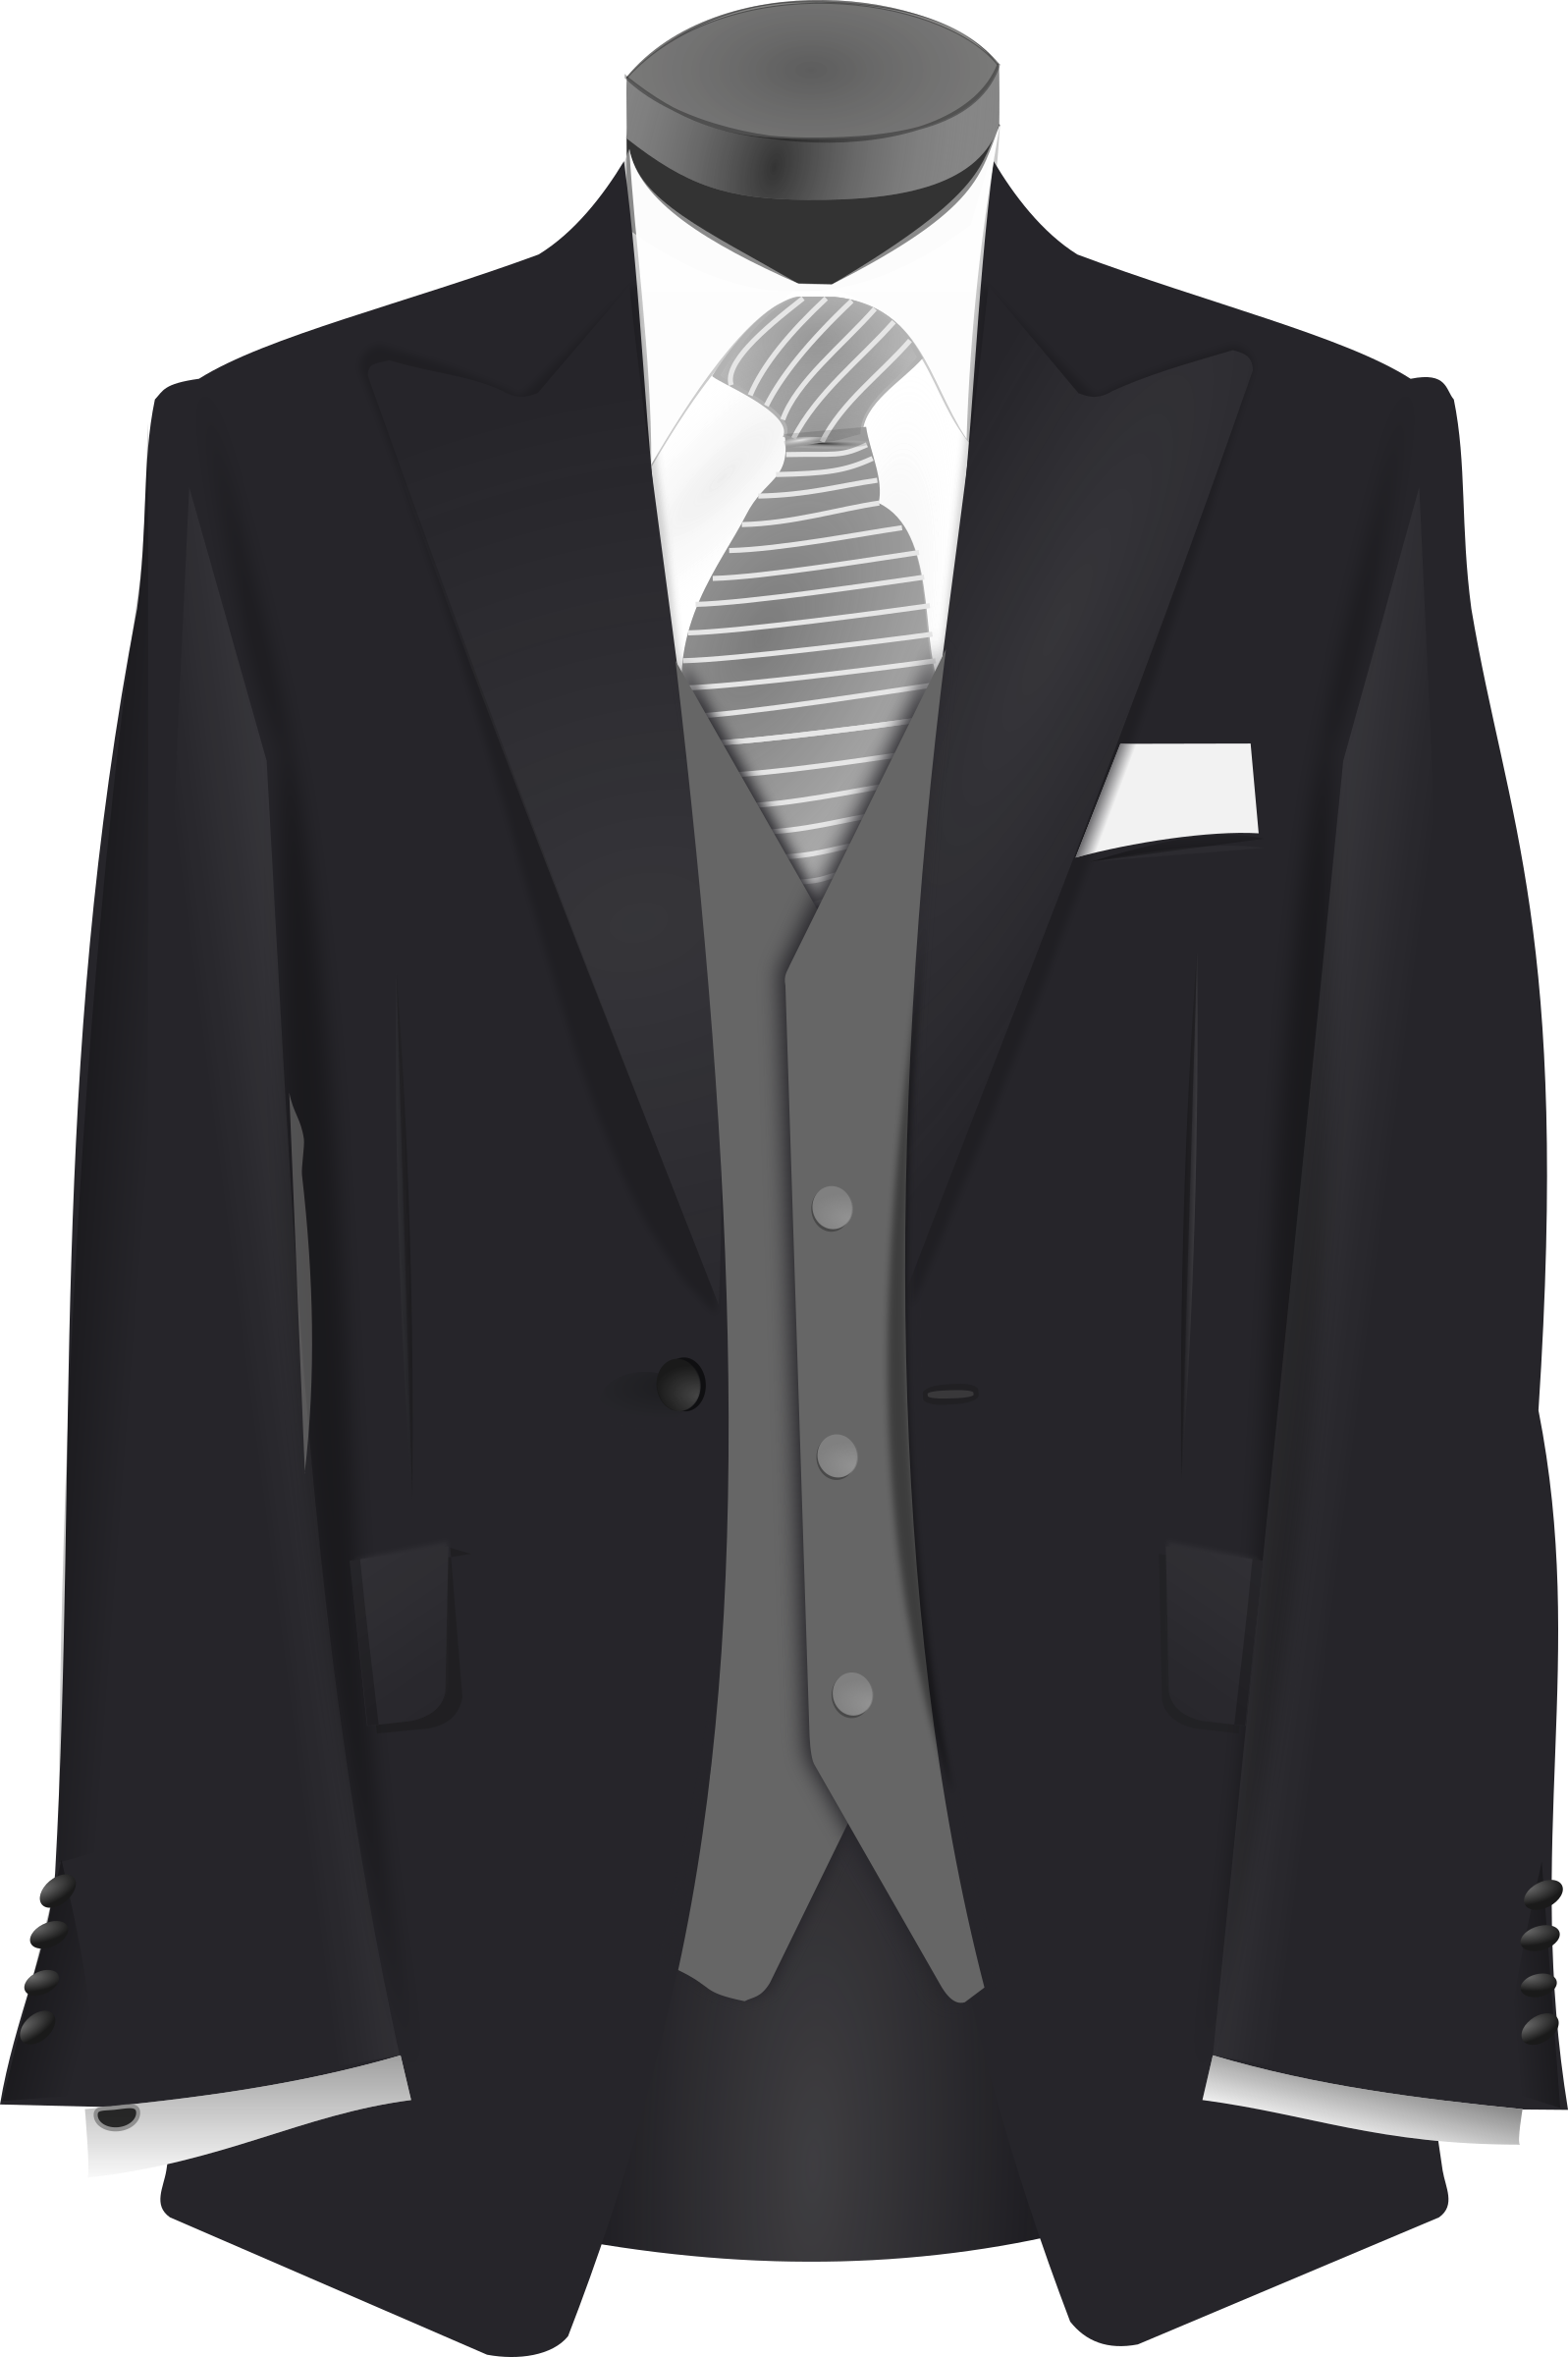 This Free Icons Png Design Of Wedding Suit